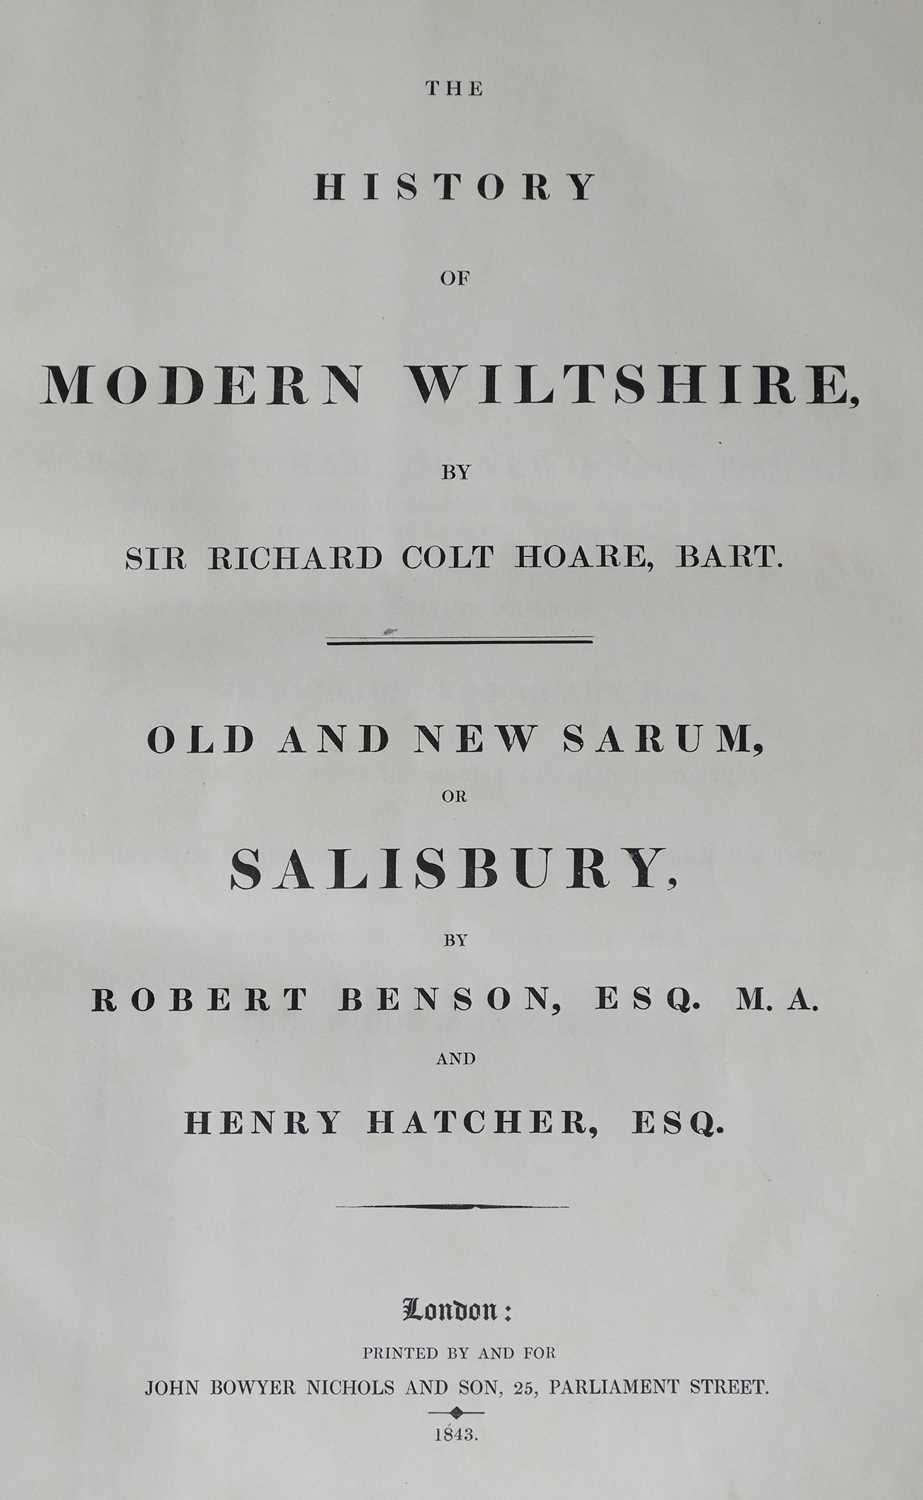 Lot 137 - Hoare (Richard Colt). The History of Modern Wiltshire, 14 volumes in 11, 1822-1844